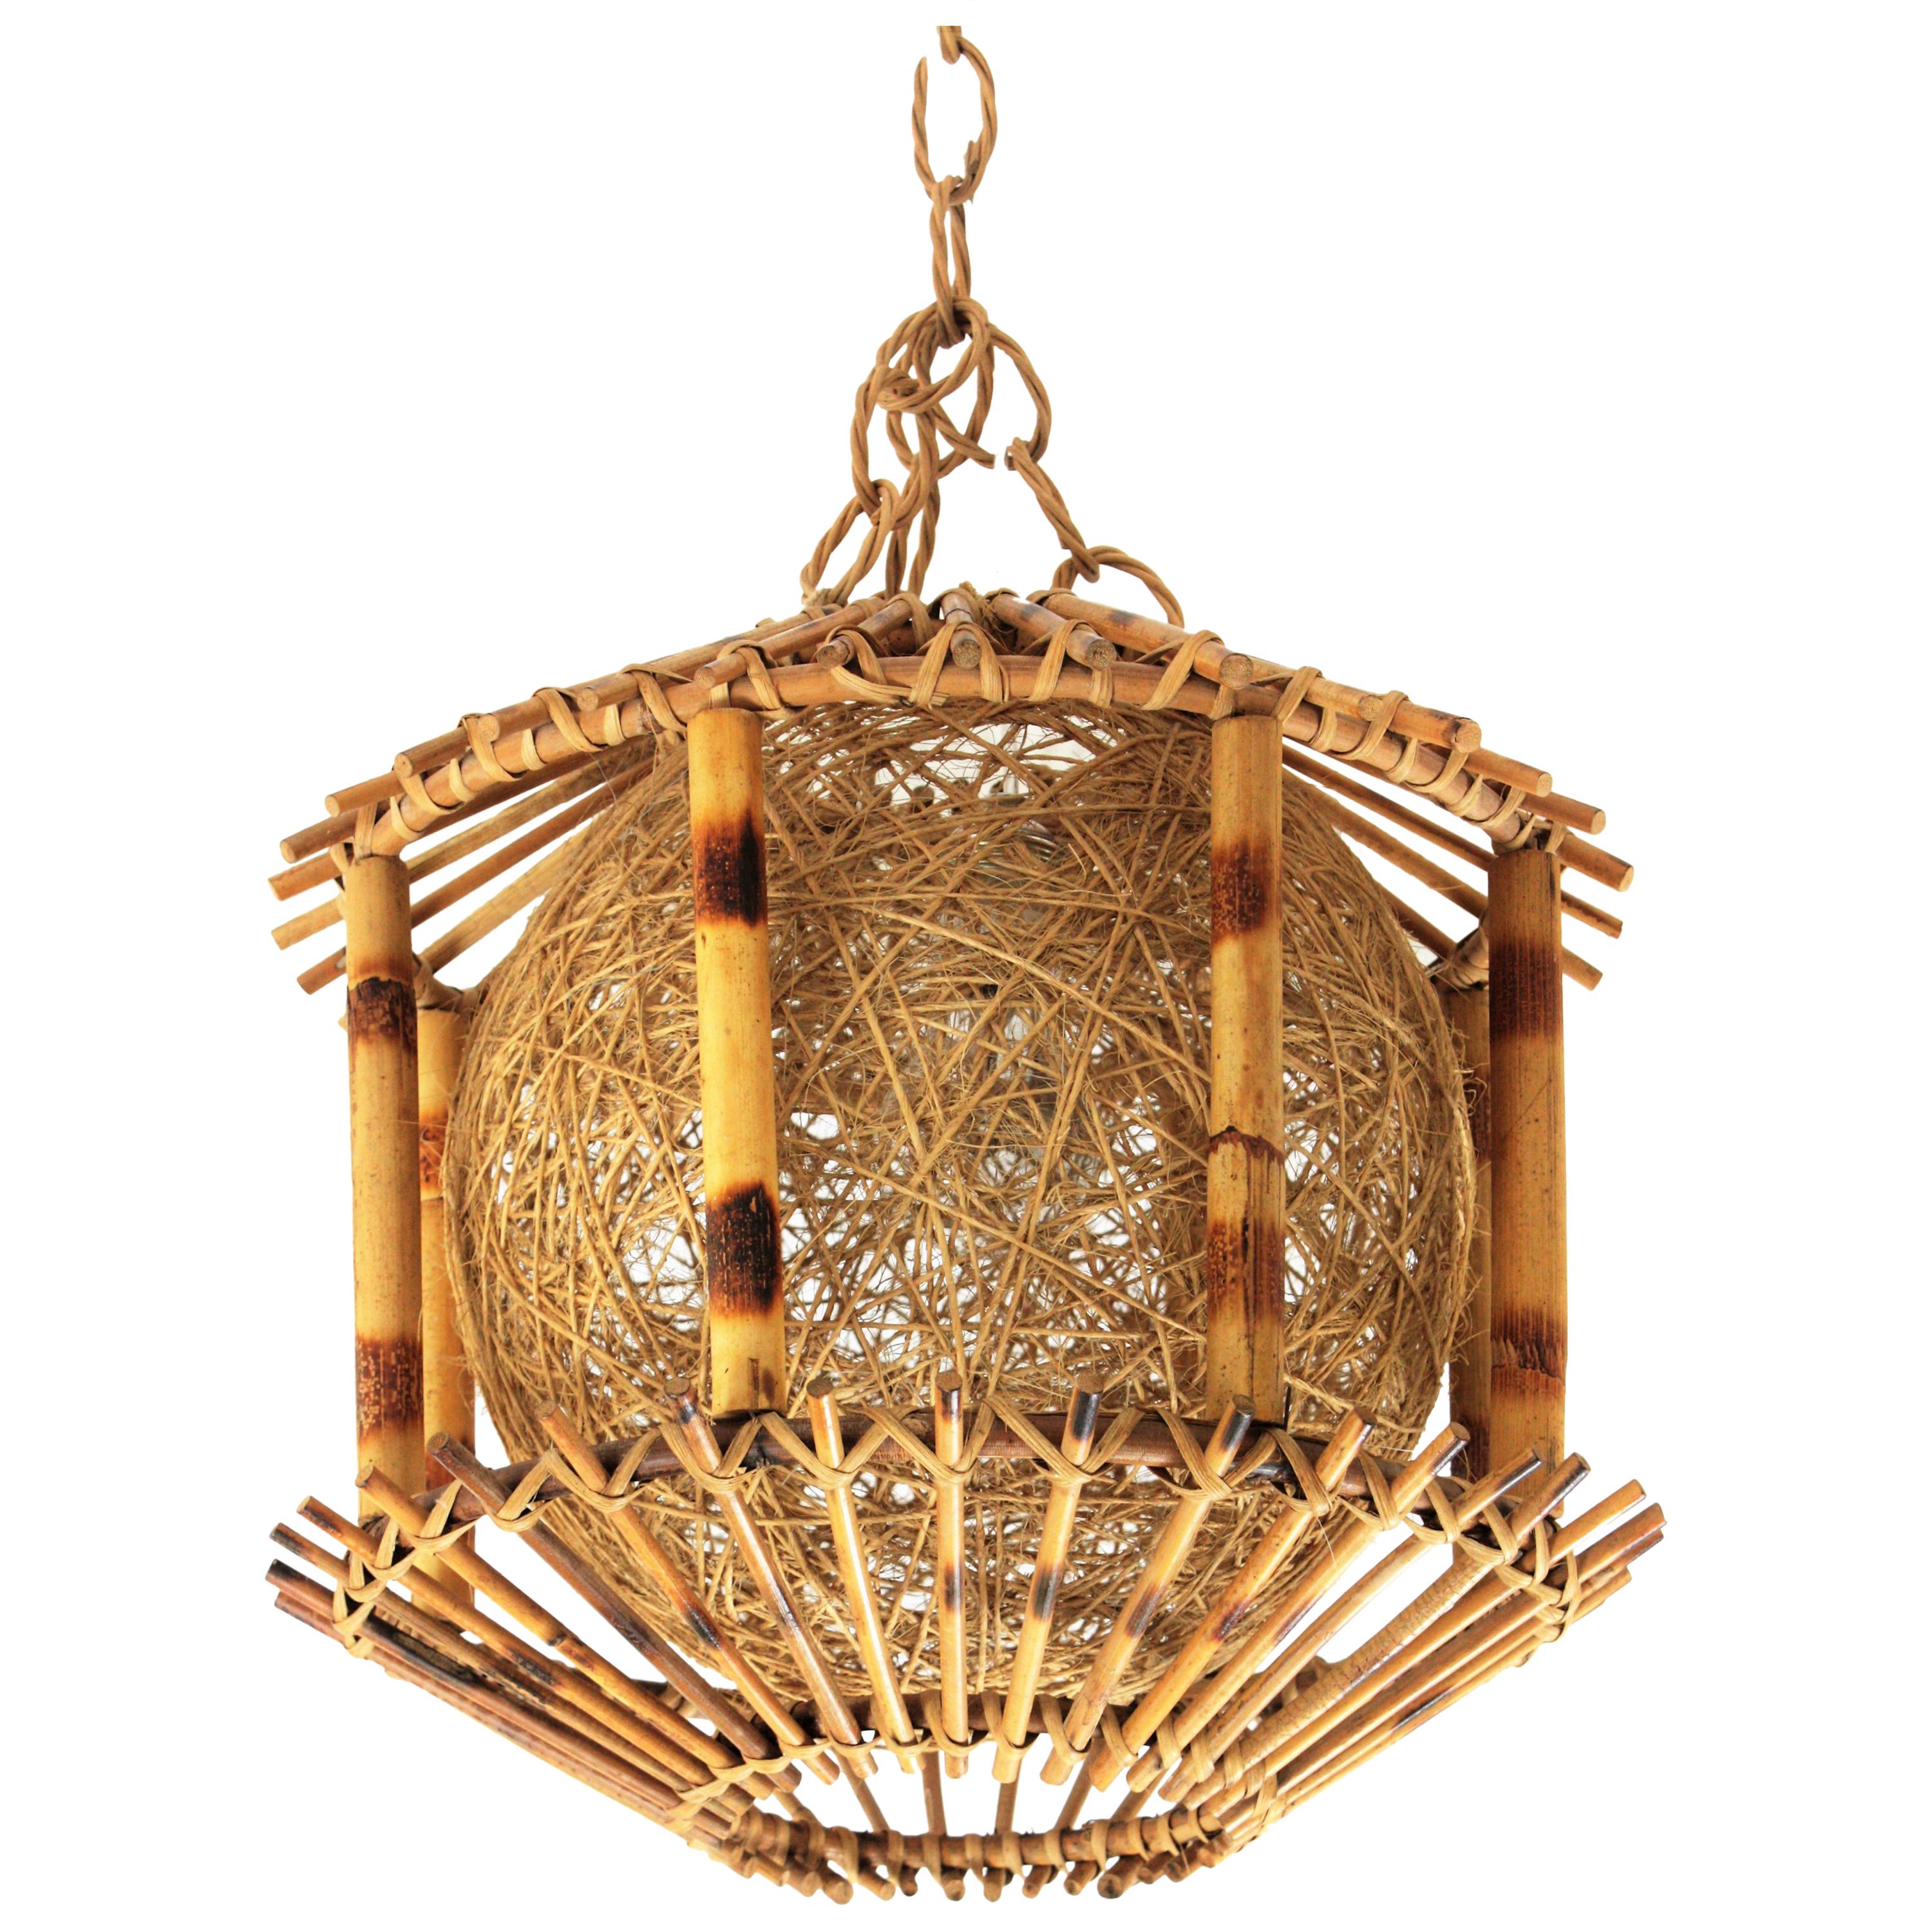 Spanish Rattan and Bamboo Pendant Hanging Lamp / Lantern with Chinoiserie Accents